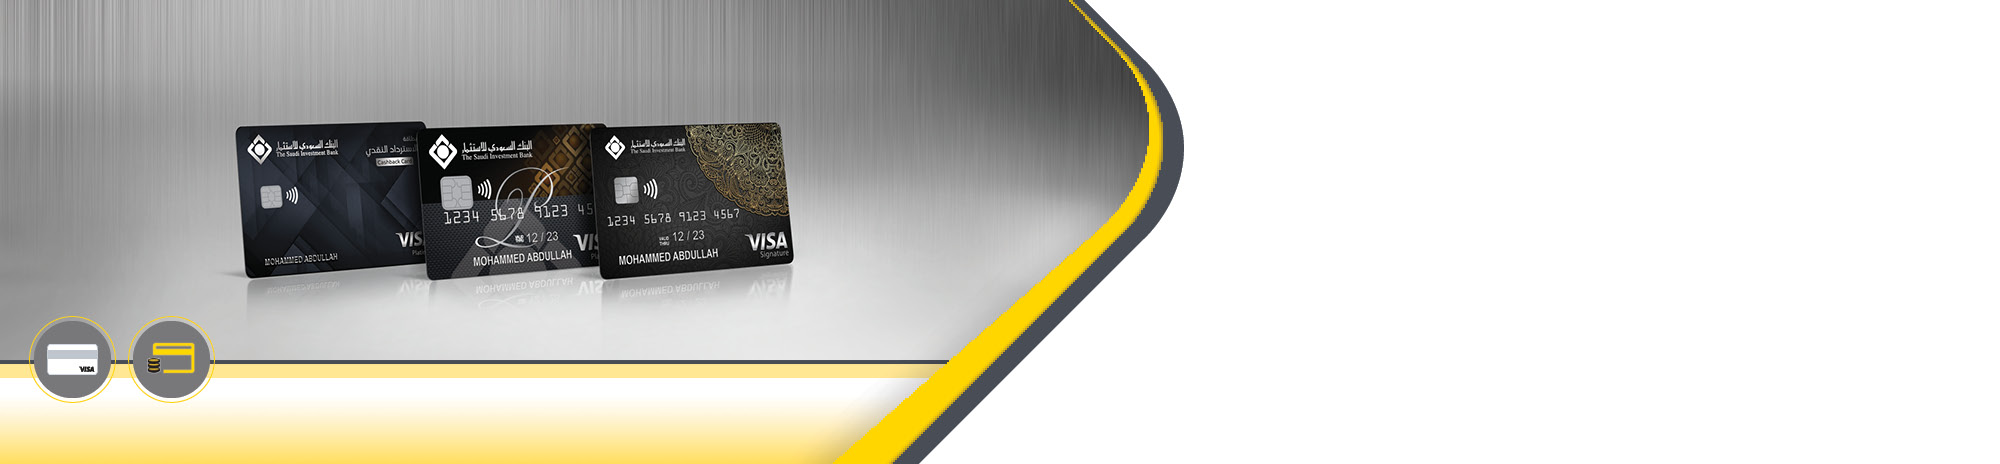 credit-cards-banner-ar